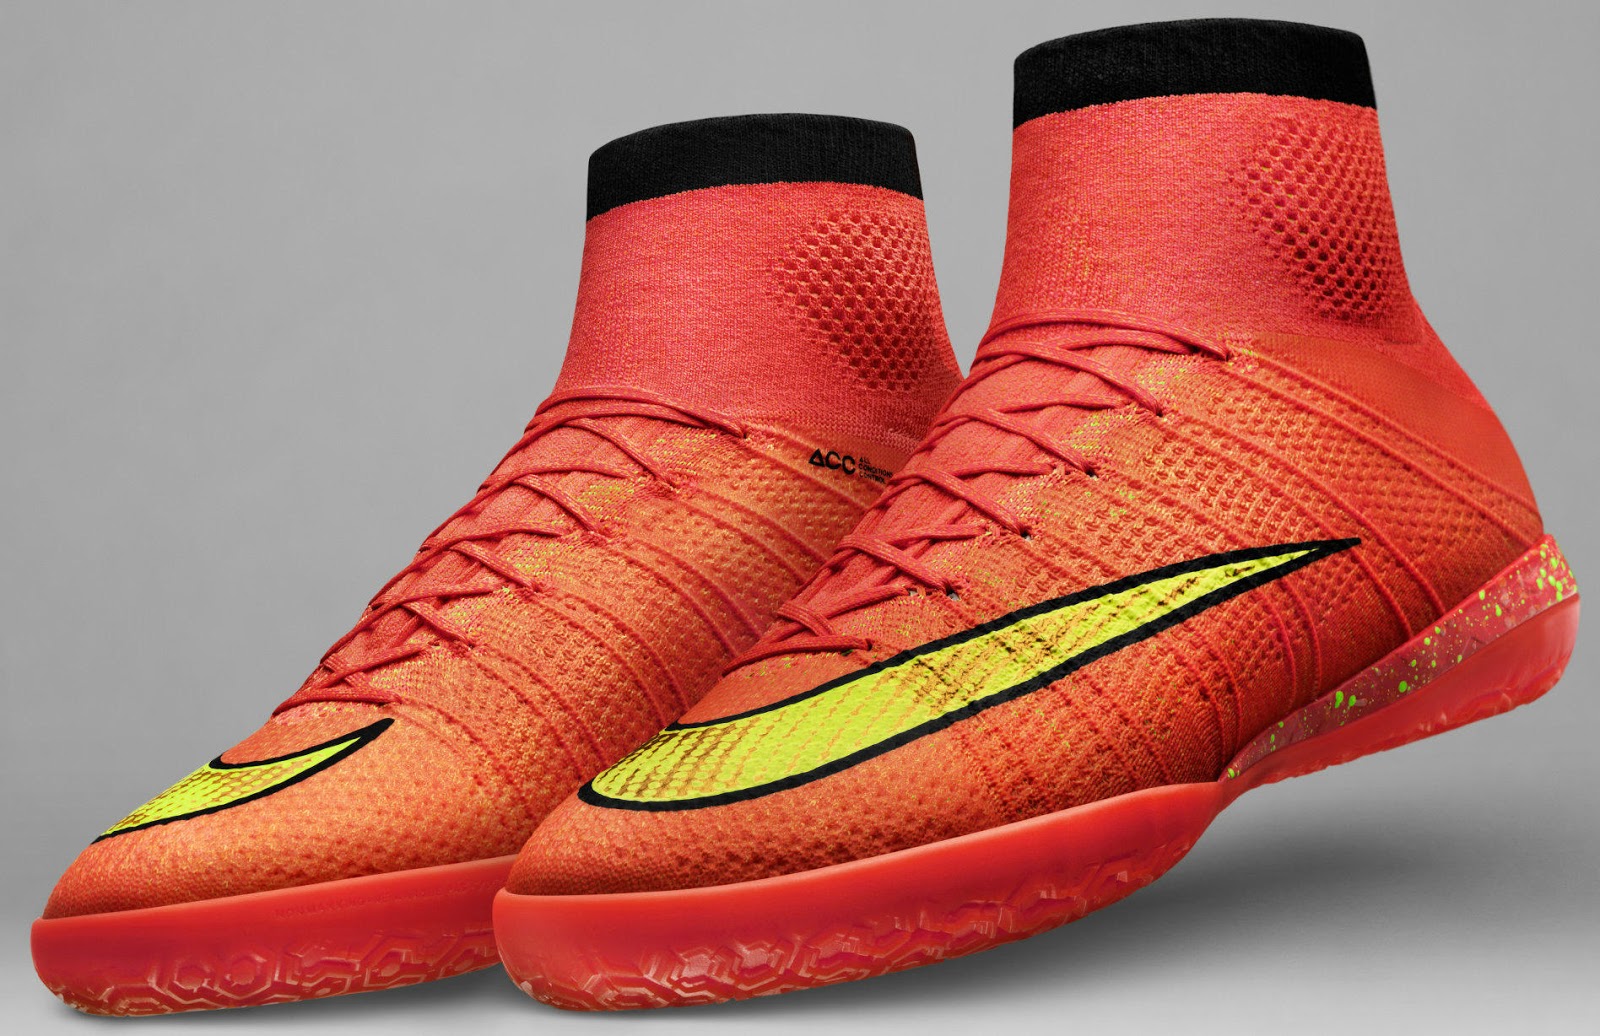 Definition water the flower seven New Nike Elastico Superfly 2014 Boot Launched - Footy Headlines